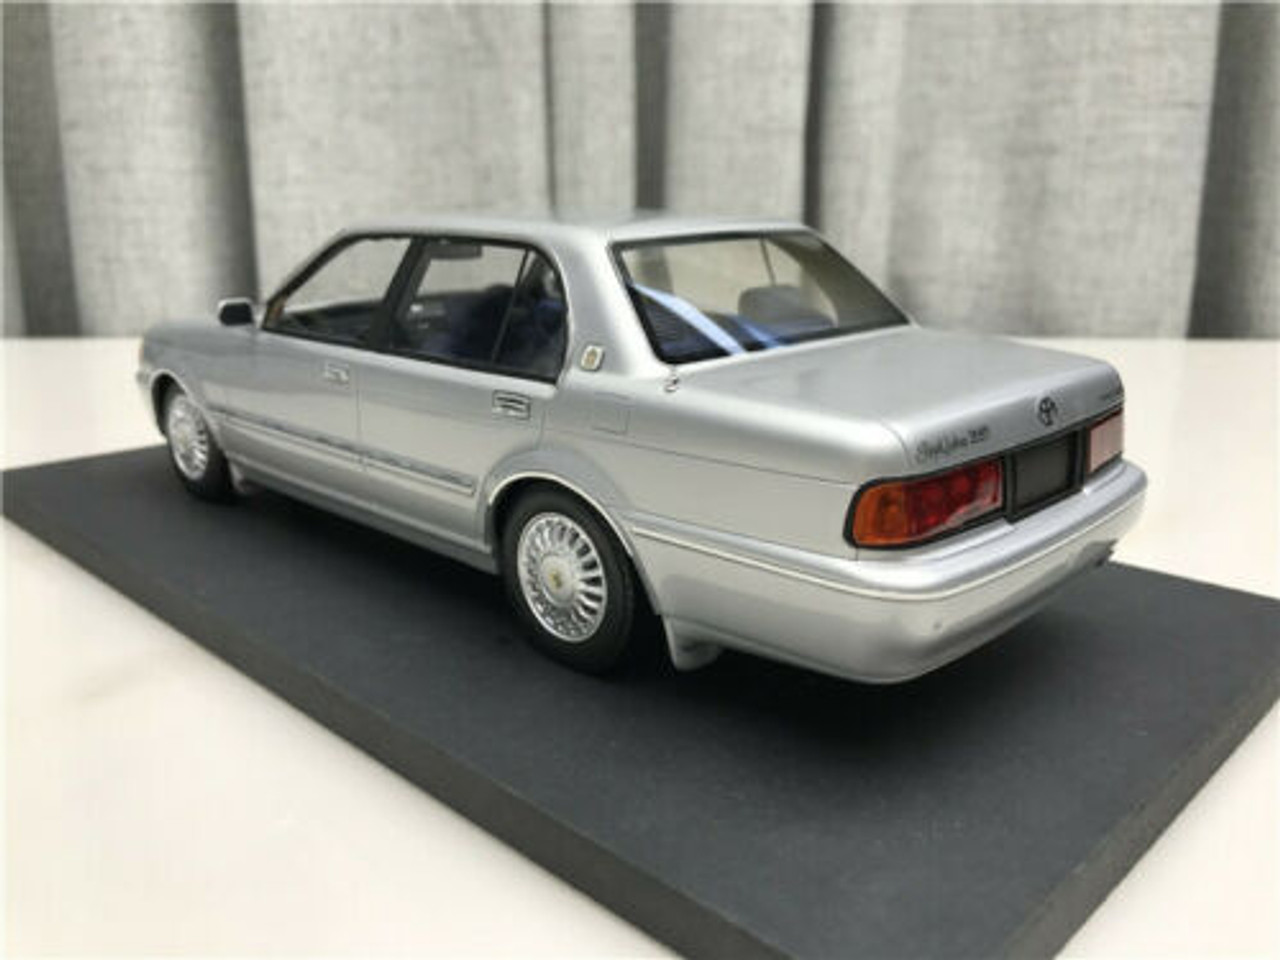 1/18 Dealer Edition Toyota Crown 133 (Silver) Enclosed Resin Car 